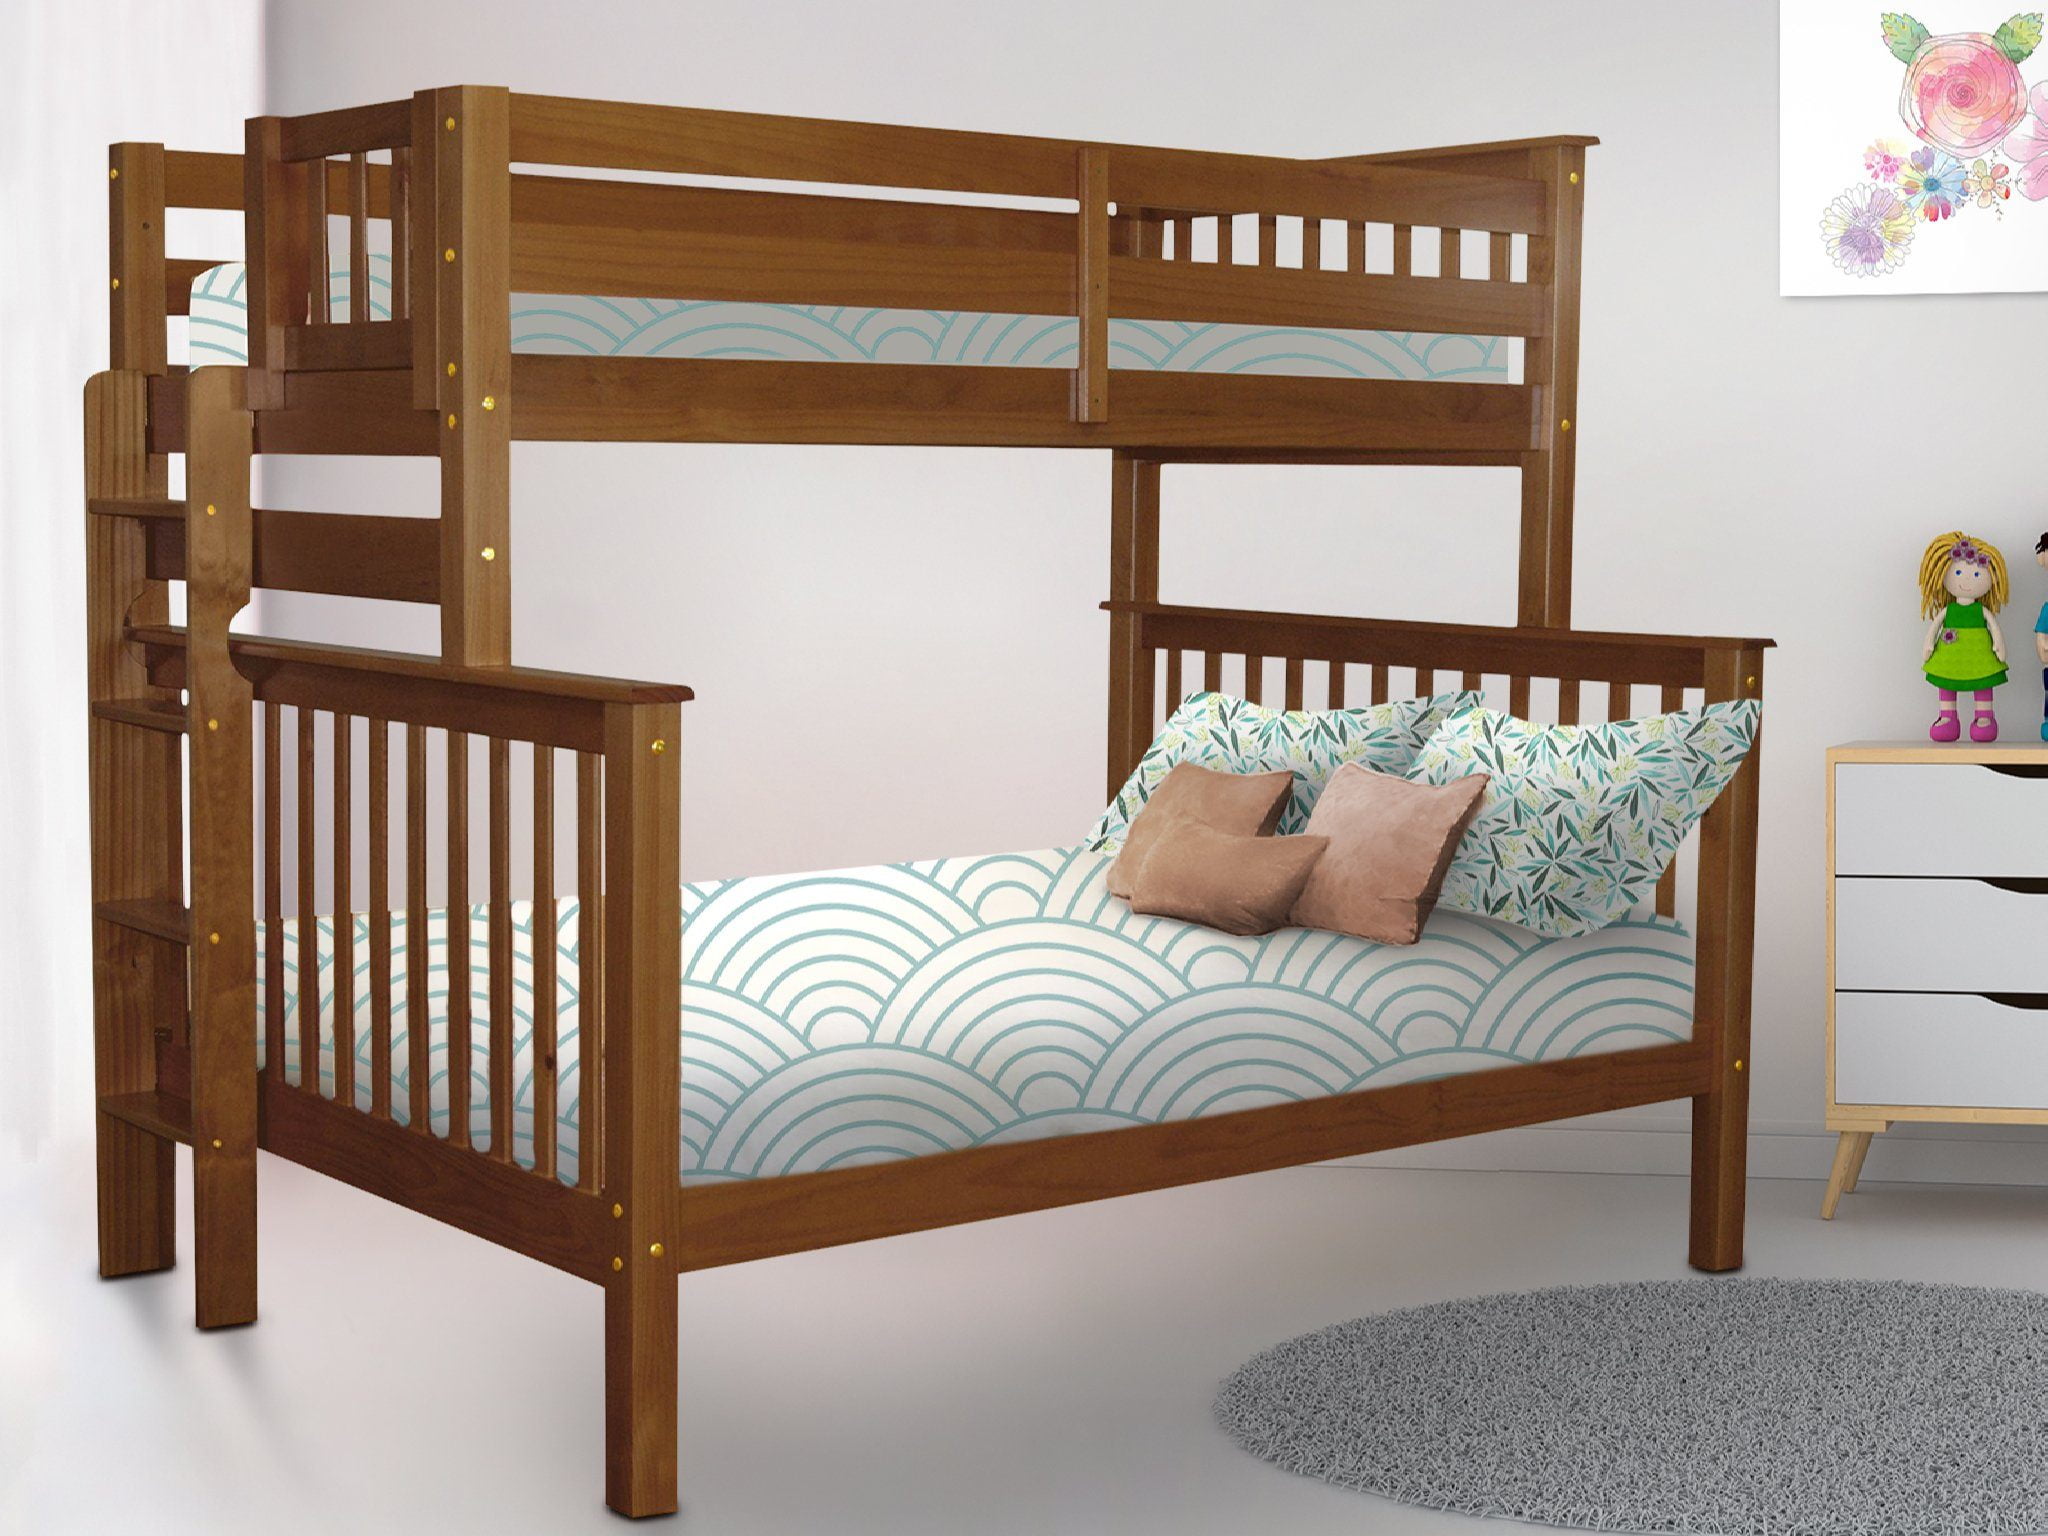 Bedz King Bunk Beds Twin Over Full, Twin Over King Bunk Bed